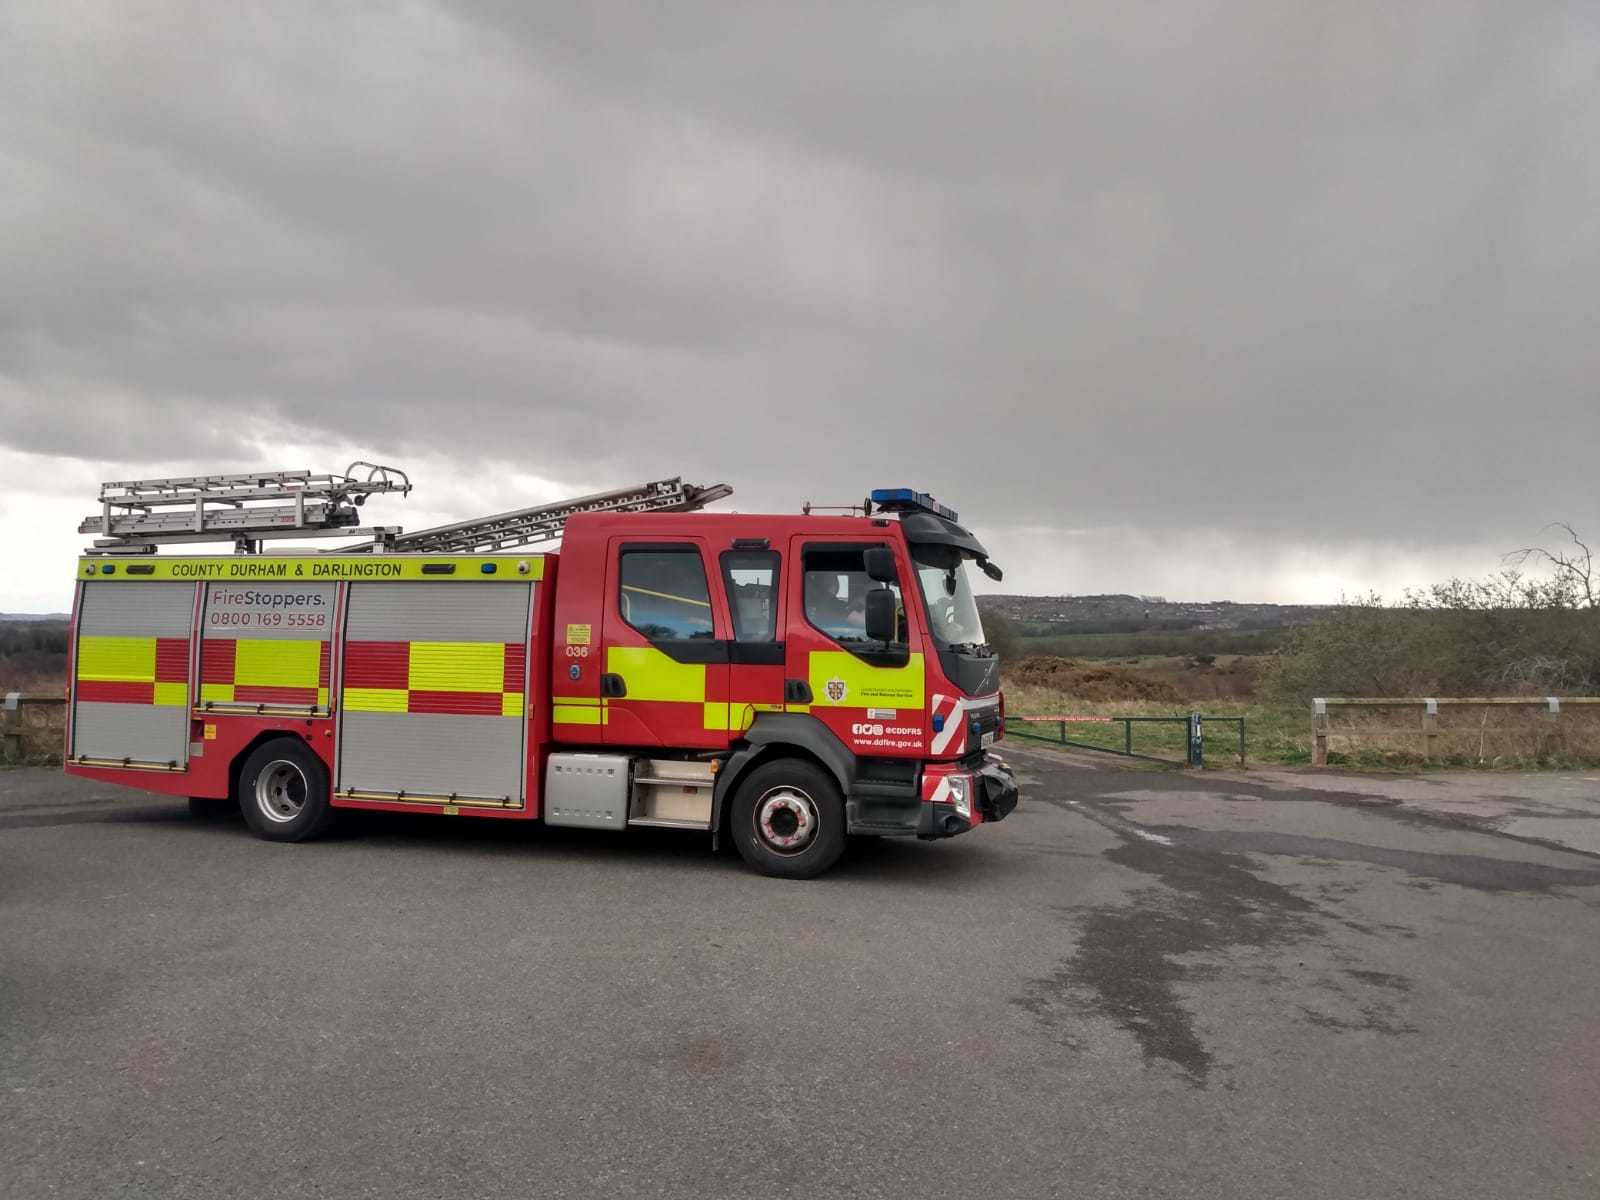 Firefighters at Waldridge Fell at the weekend